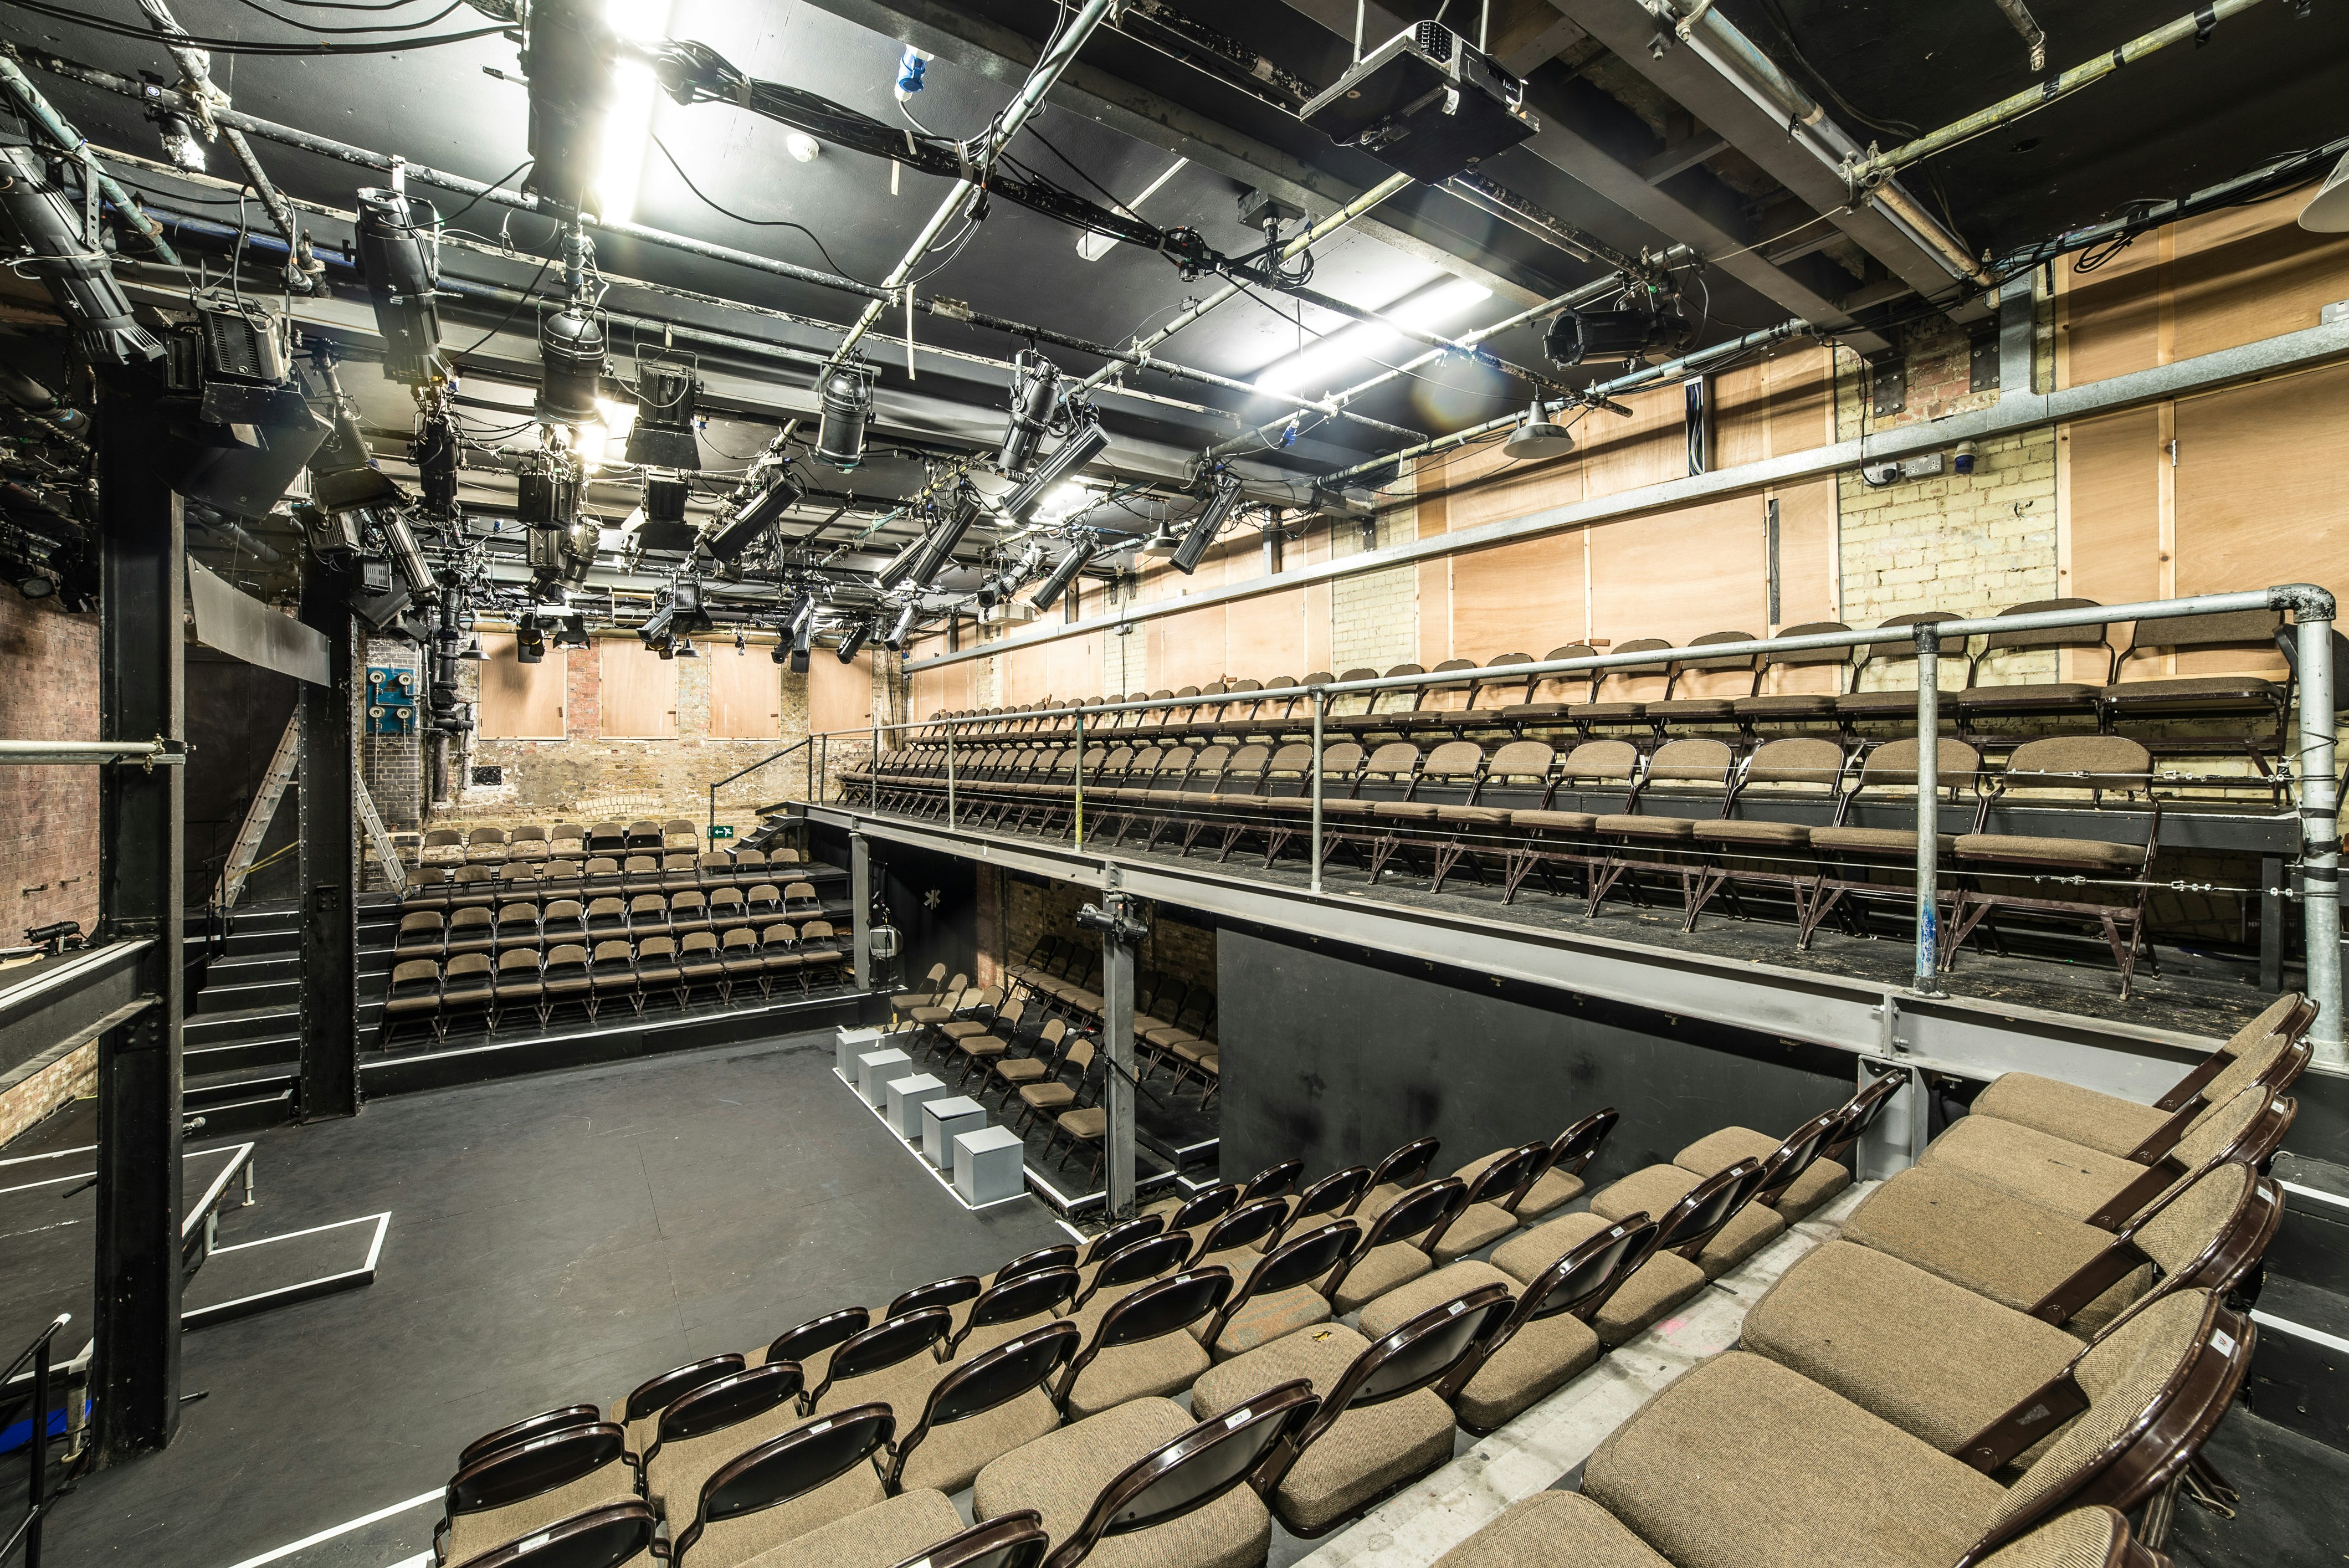 Away Day Venues in North London - Arcola Theatre & Bar